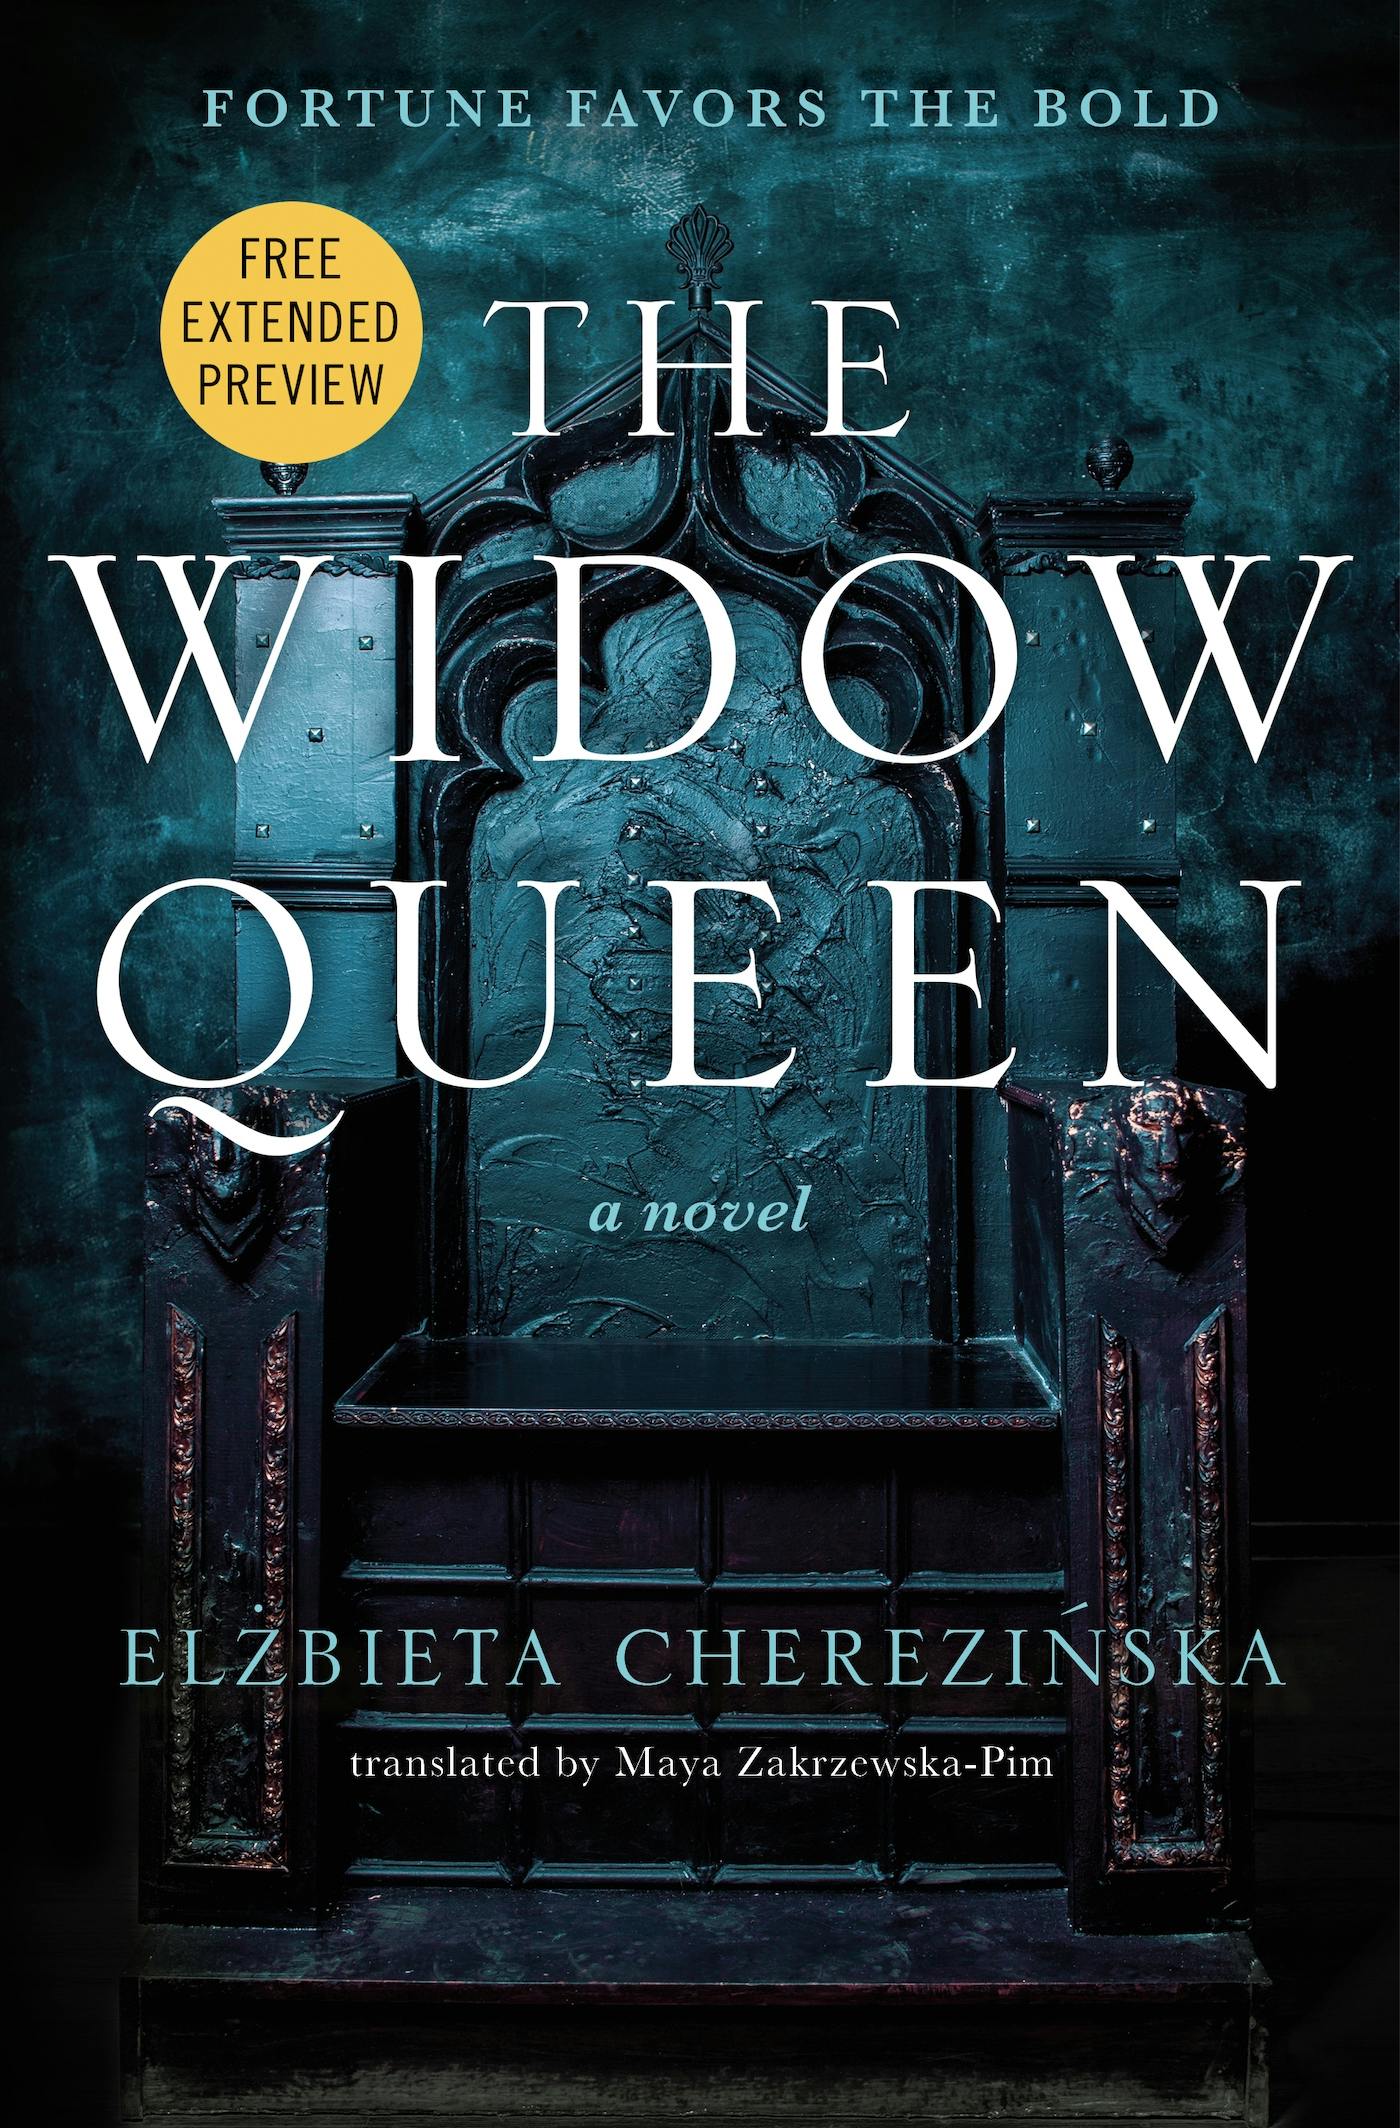 Cover for the book titled as: The Widow Queen Sneak Peek